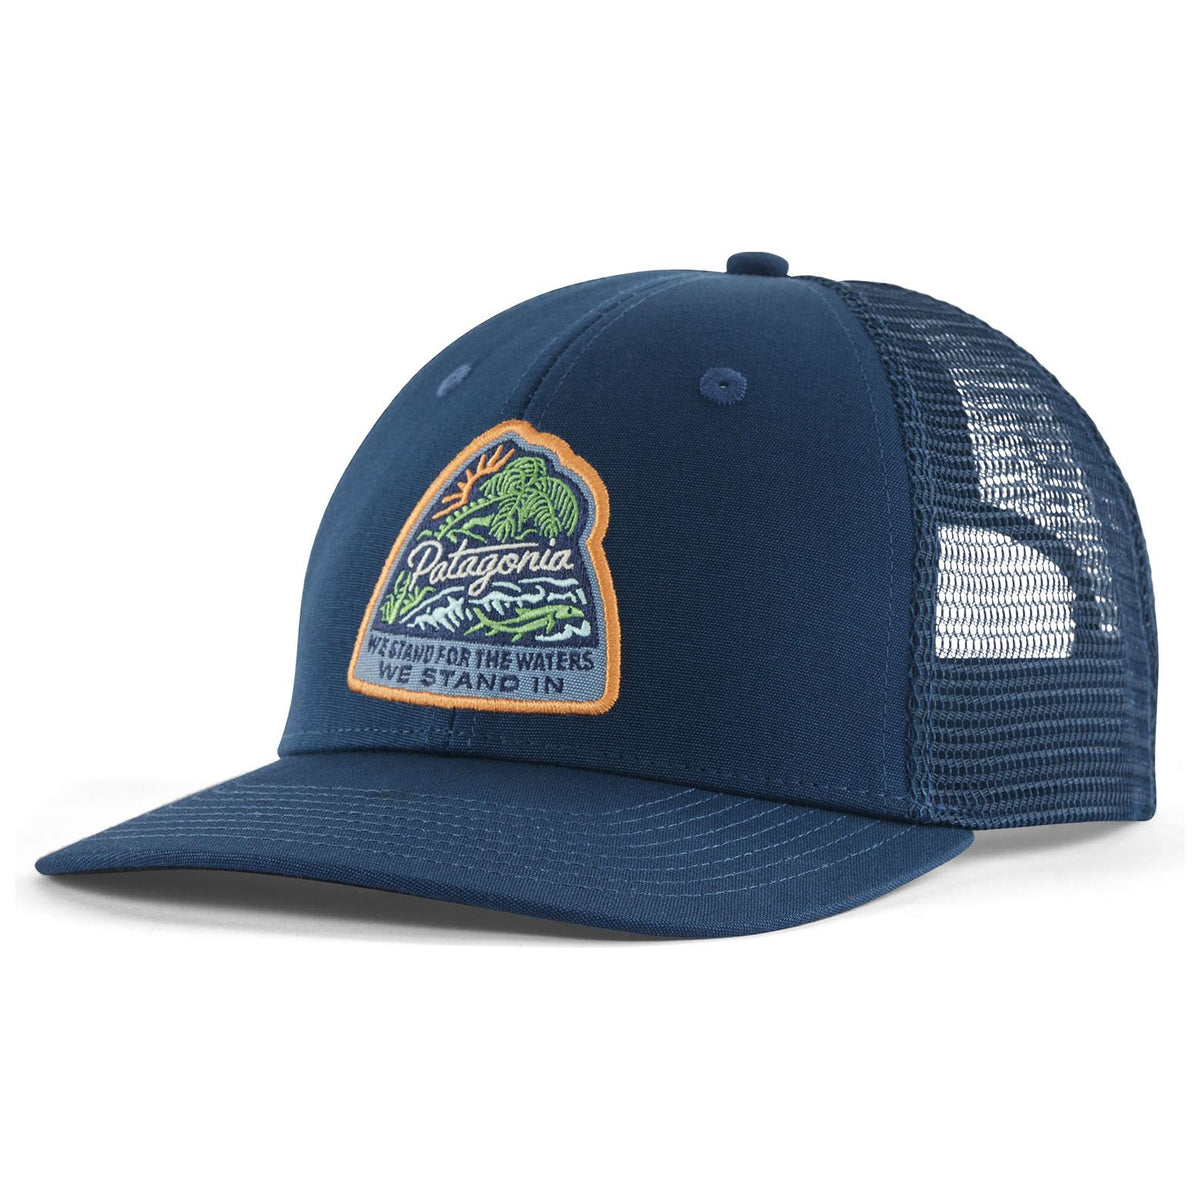 Patagonia Take A Stand Trucker Hat - Stream Fed Pumice